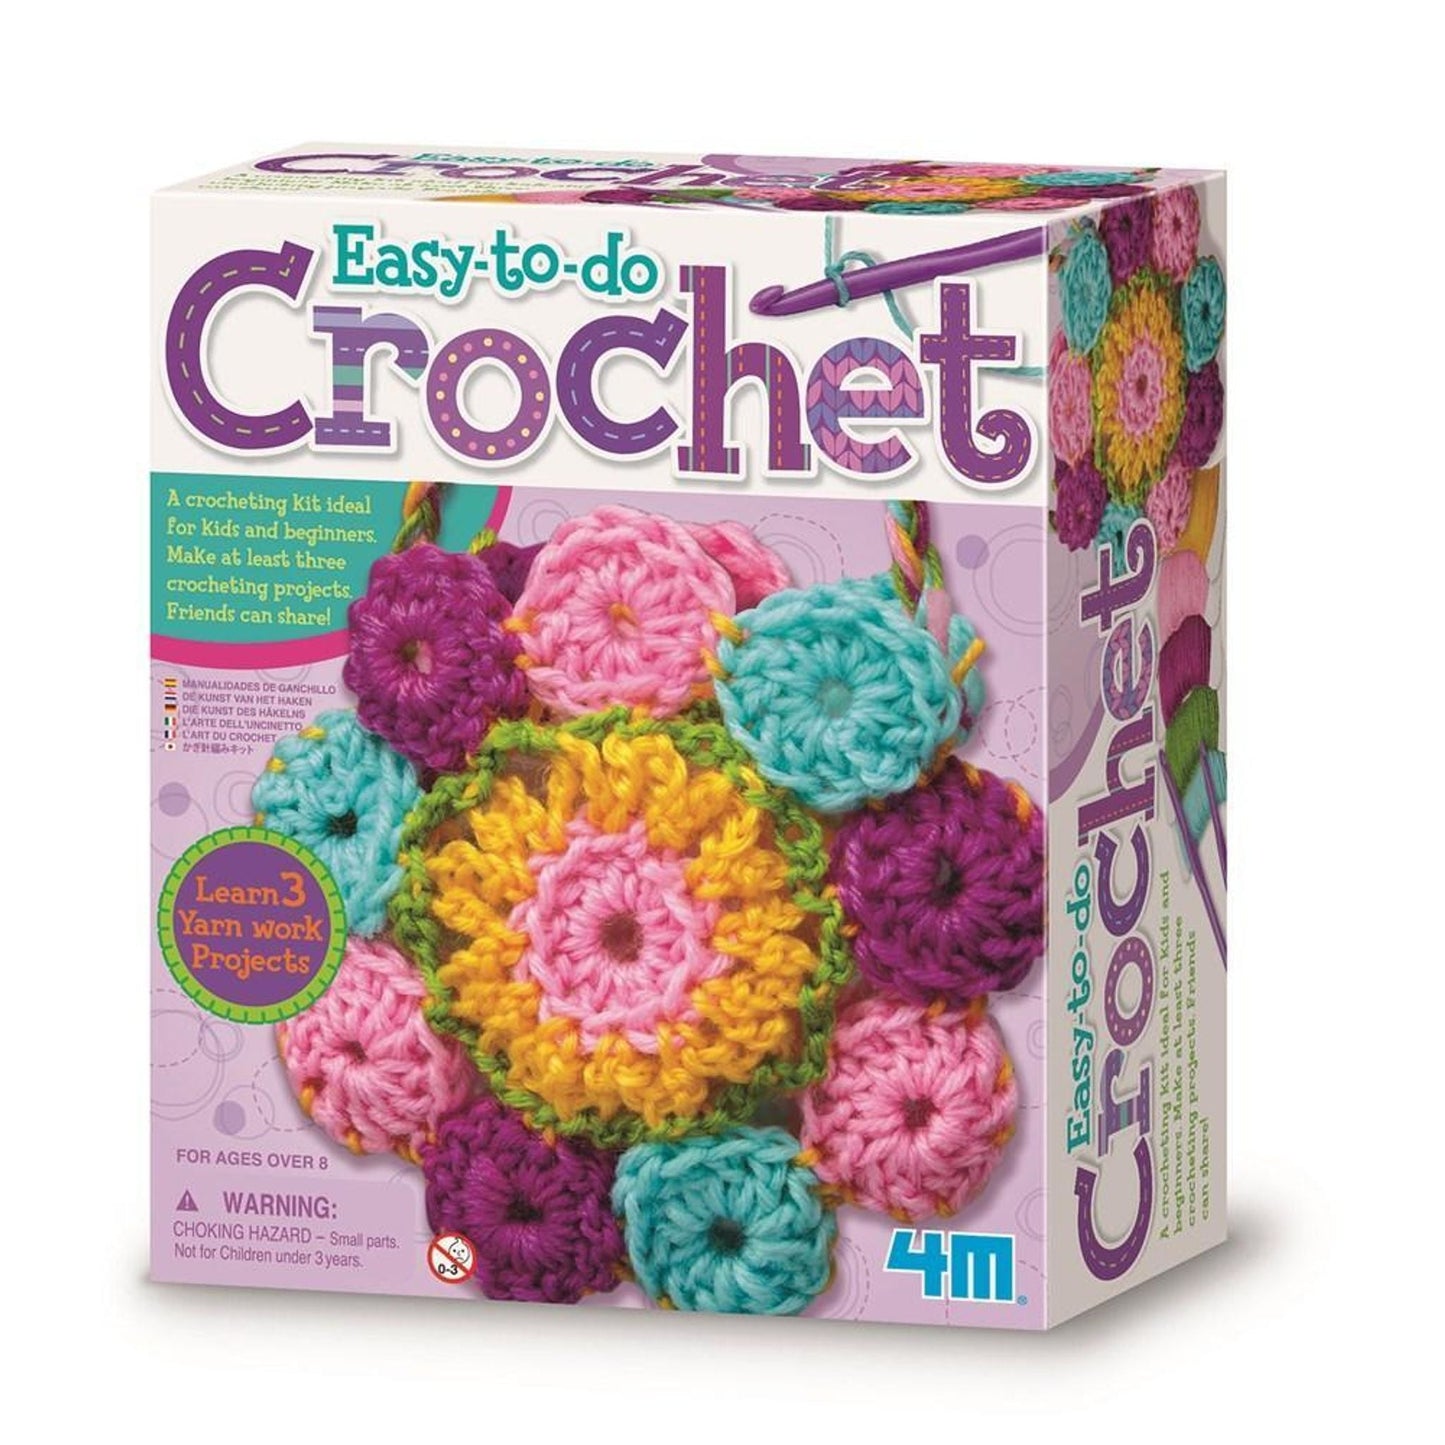 Easy-to-do Crochet Art - Toybox Tales